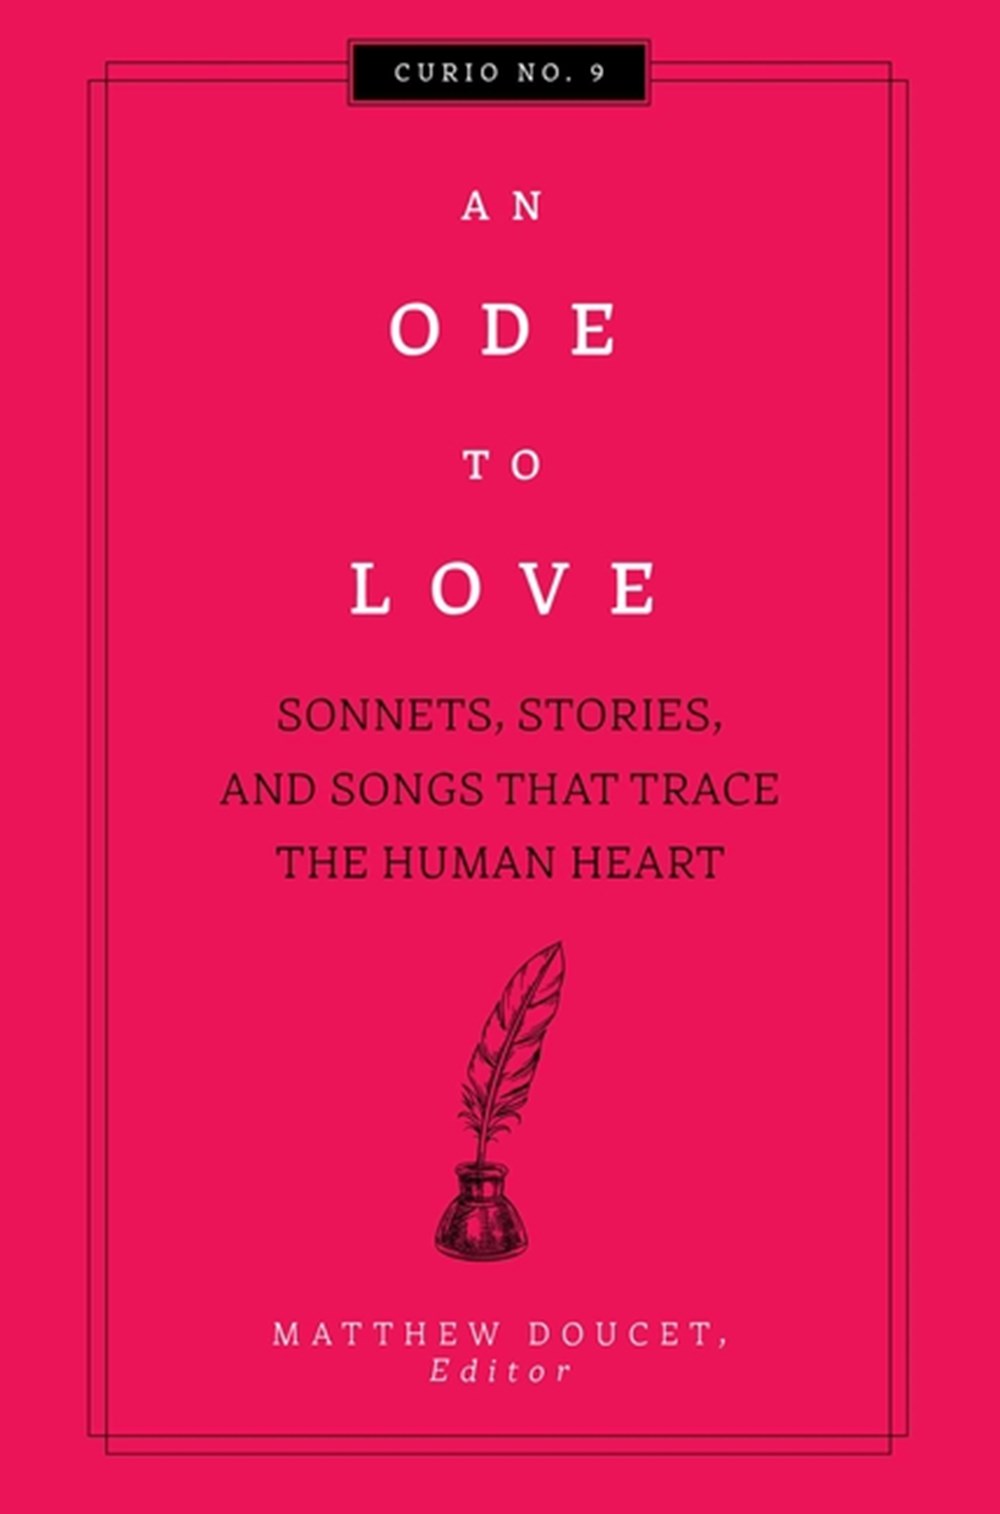 Ode to Love Sonnets, Stories, and Songs That Trace the Human Heart